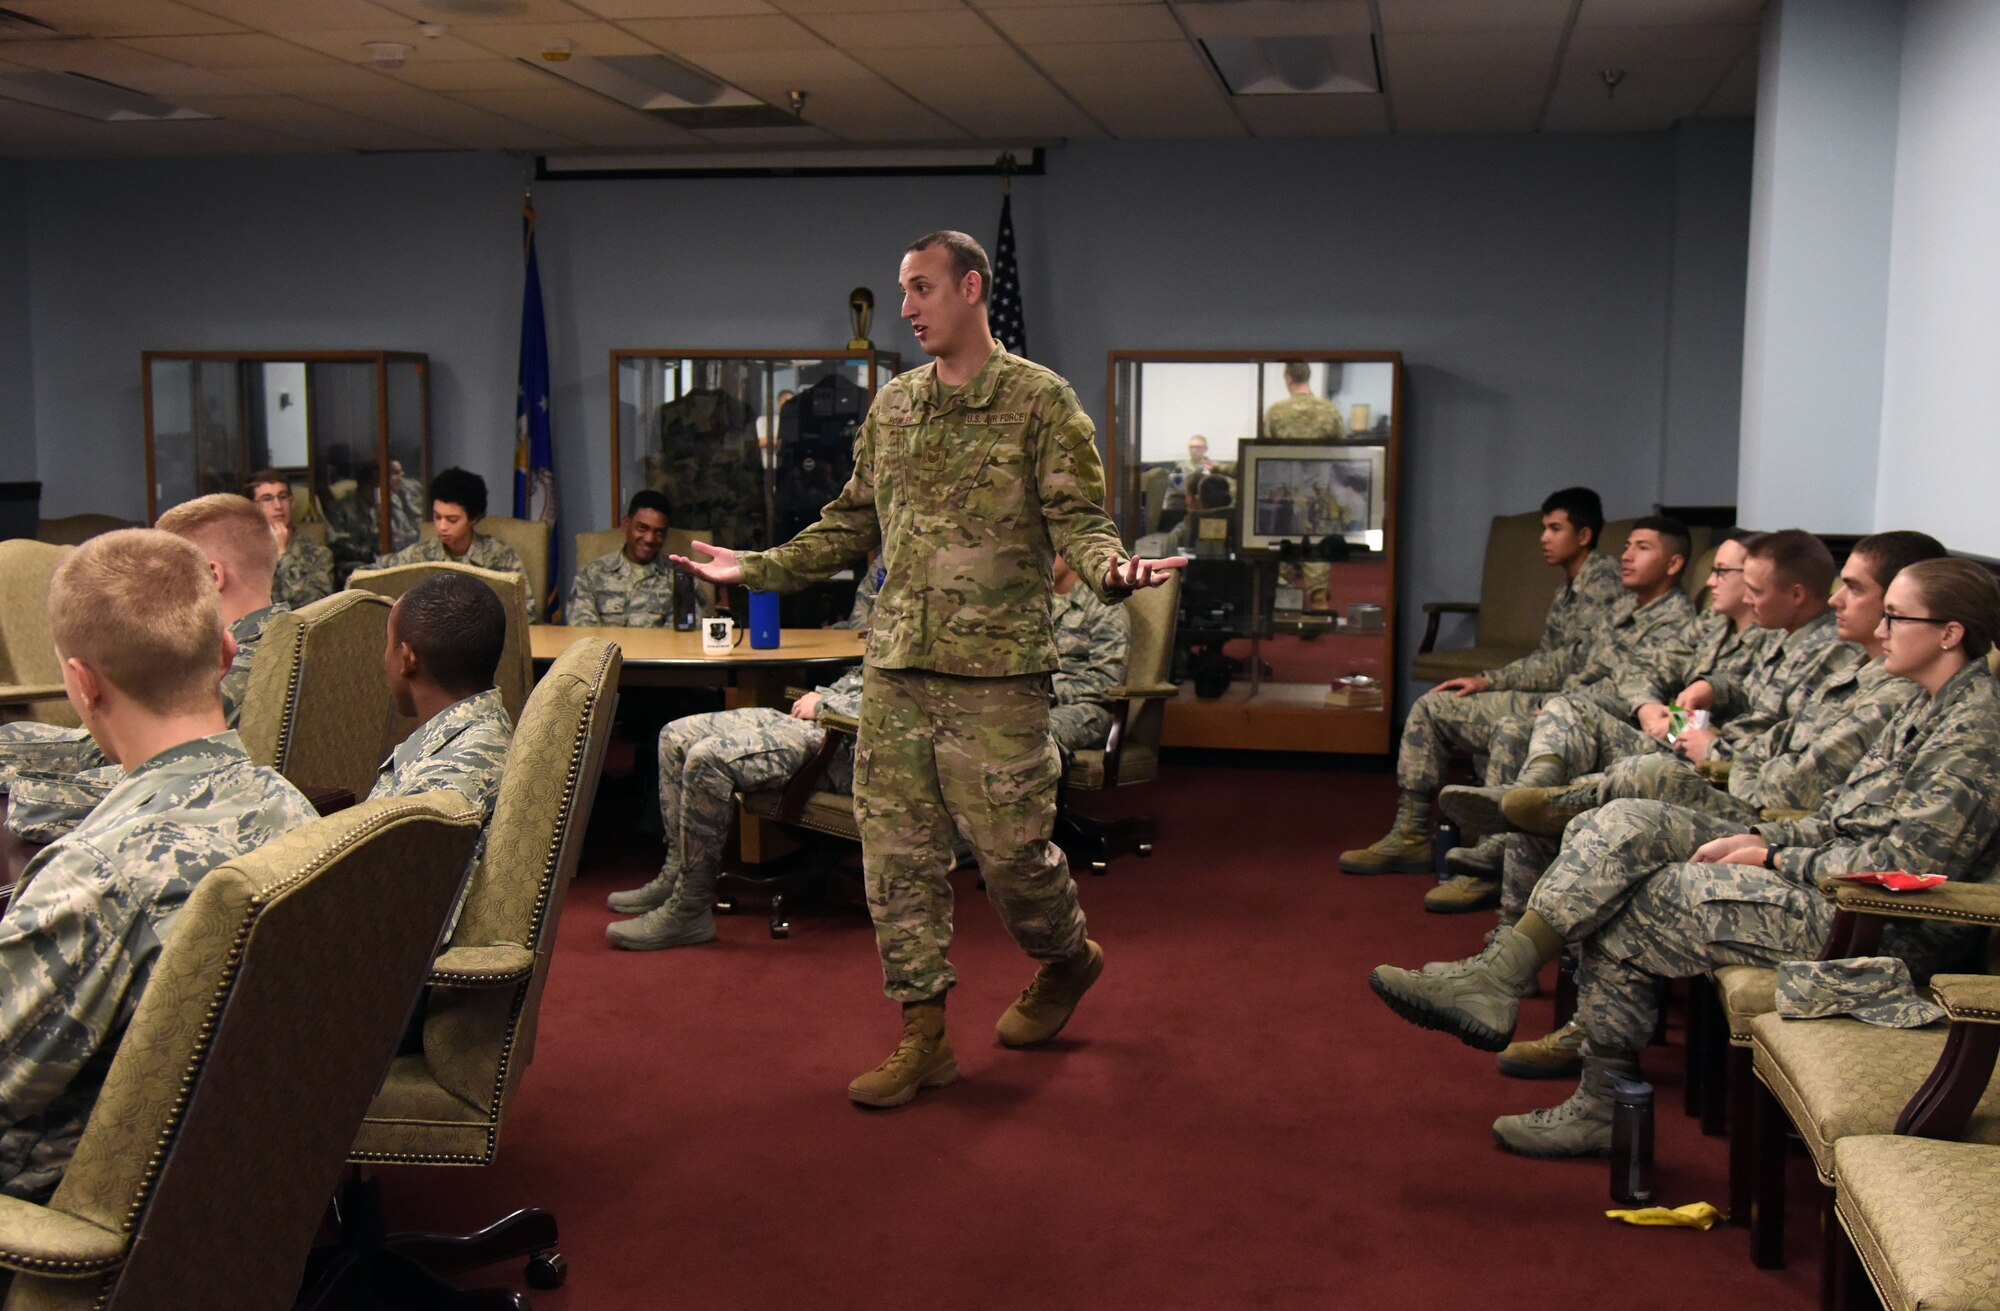 U.S. Air Force Tech. Sgt. Alex Rowley, 335th Training Squadron instructor, speaks to Airmen about resiliency during Wingman Day inside the Weather Training Complex on Keesler Air Force Base, Mississippi, Oct. 18, 2018. Wingman Day focused on the physical domain, resiliency and team-building initiatives across the base. (U.S. Air Force photo by Kemberly Groue)